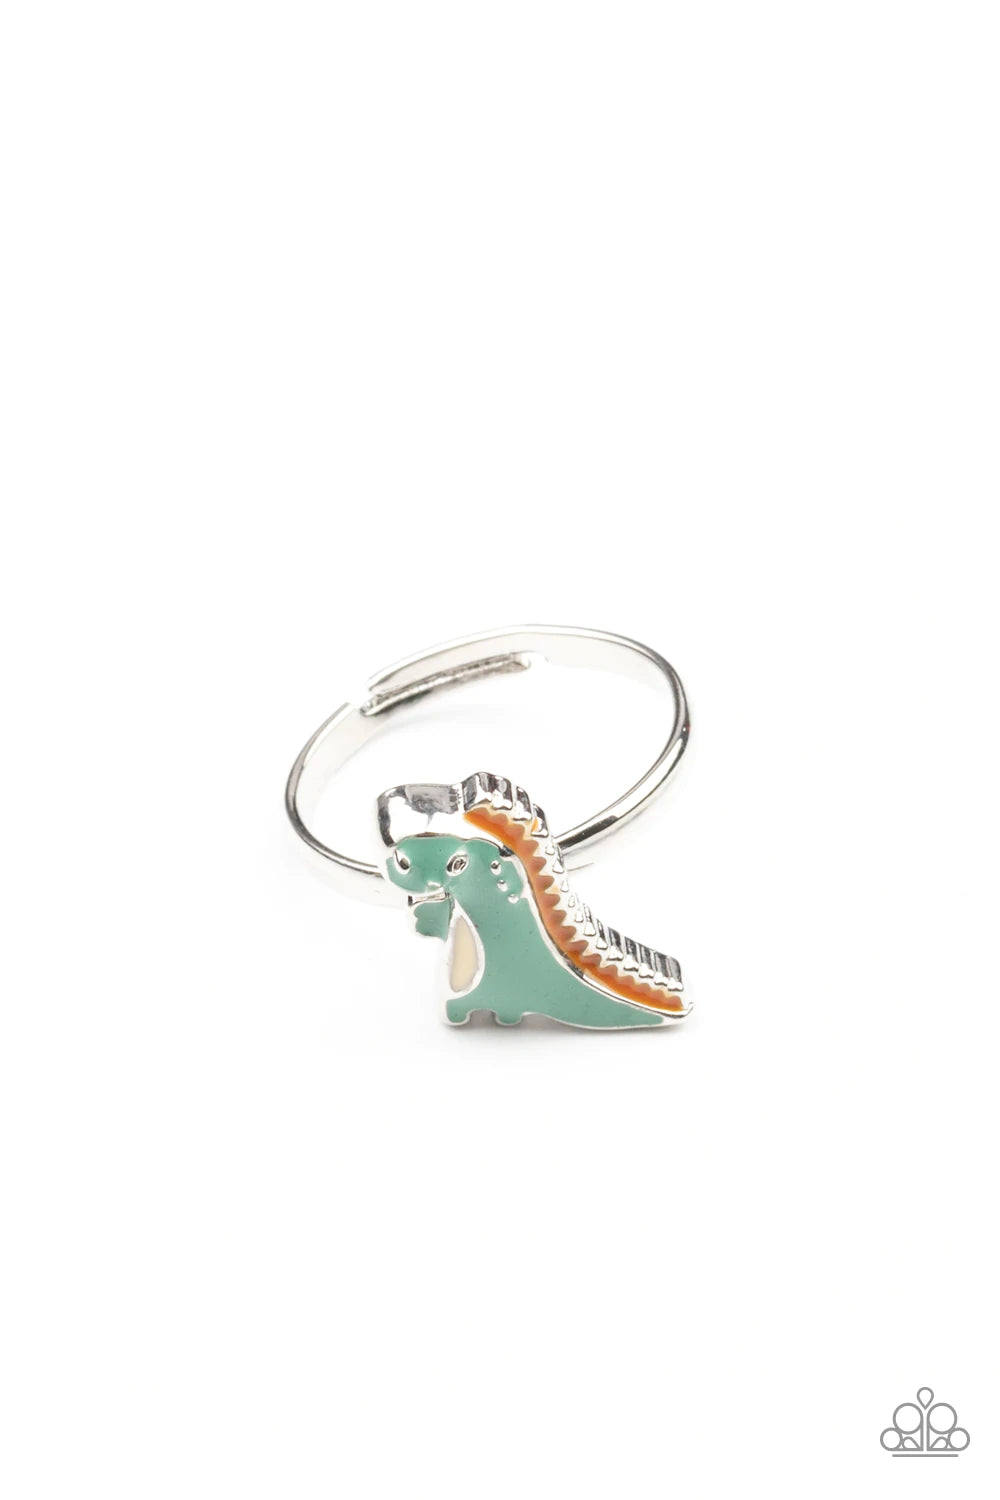 Paparazzi Accessories Starlet Shimmer Rings: #2 The prehistoric world is at your fingertips. Features colorfully painted dinosaurs, including stegosaurus, brontosaurus, and more. Jewelry